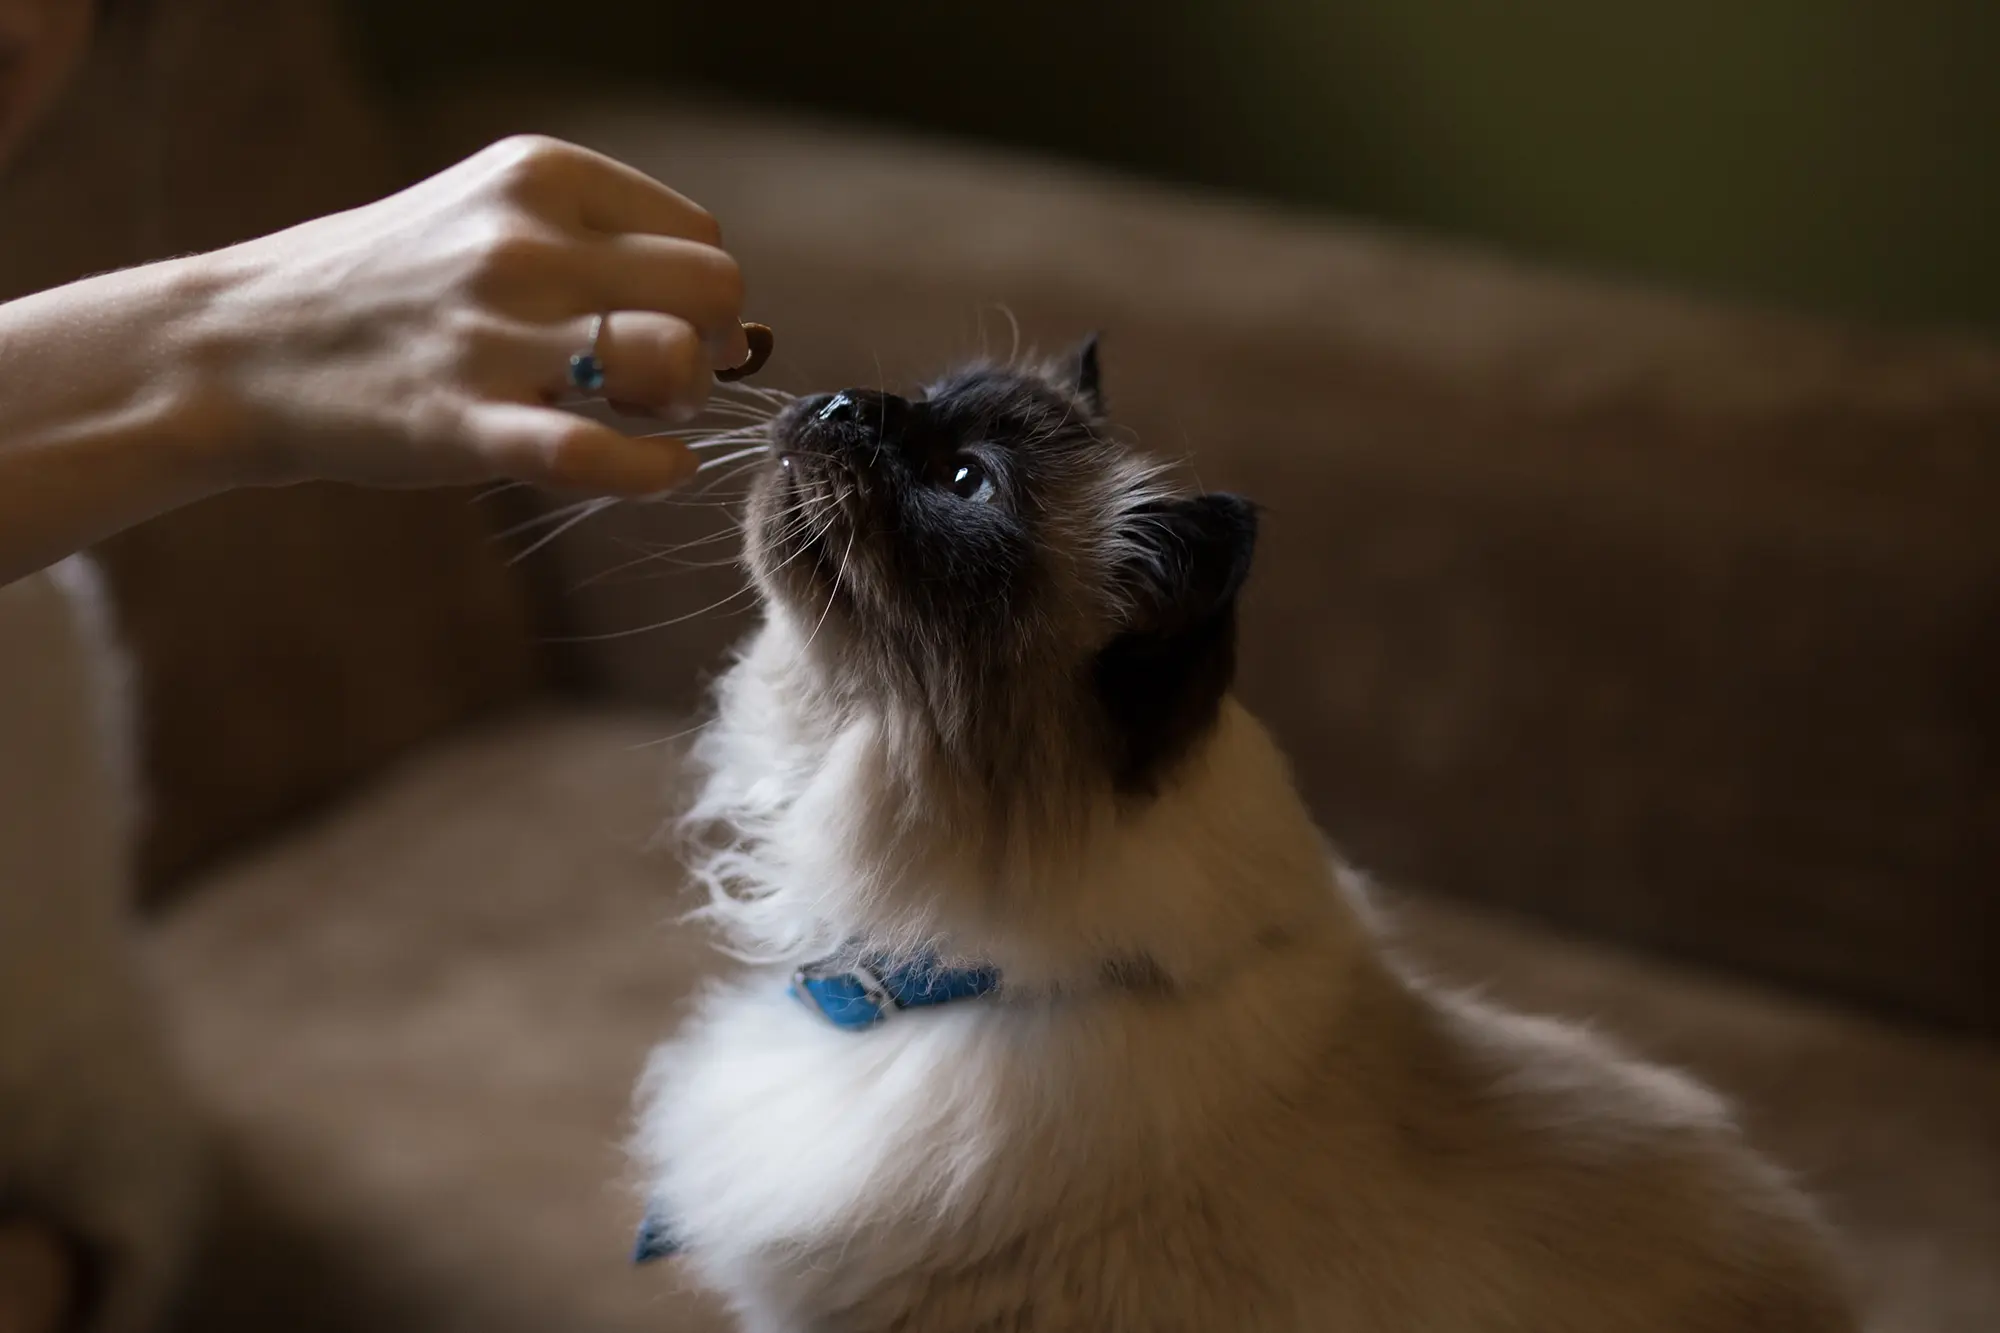 Cat-Safe Snacks to Share With Your Pet